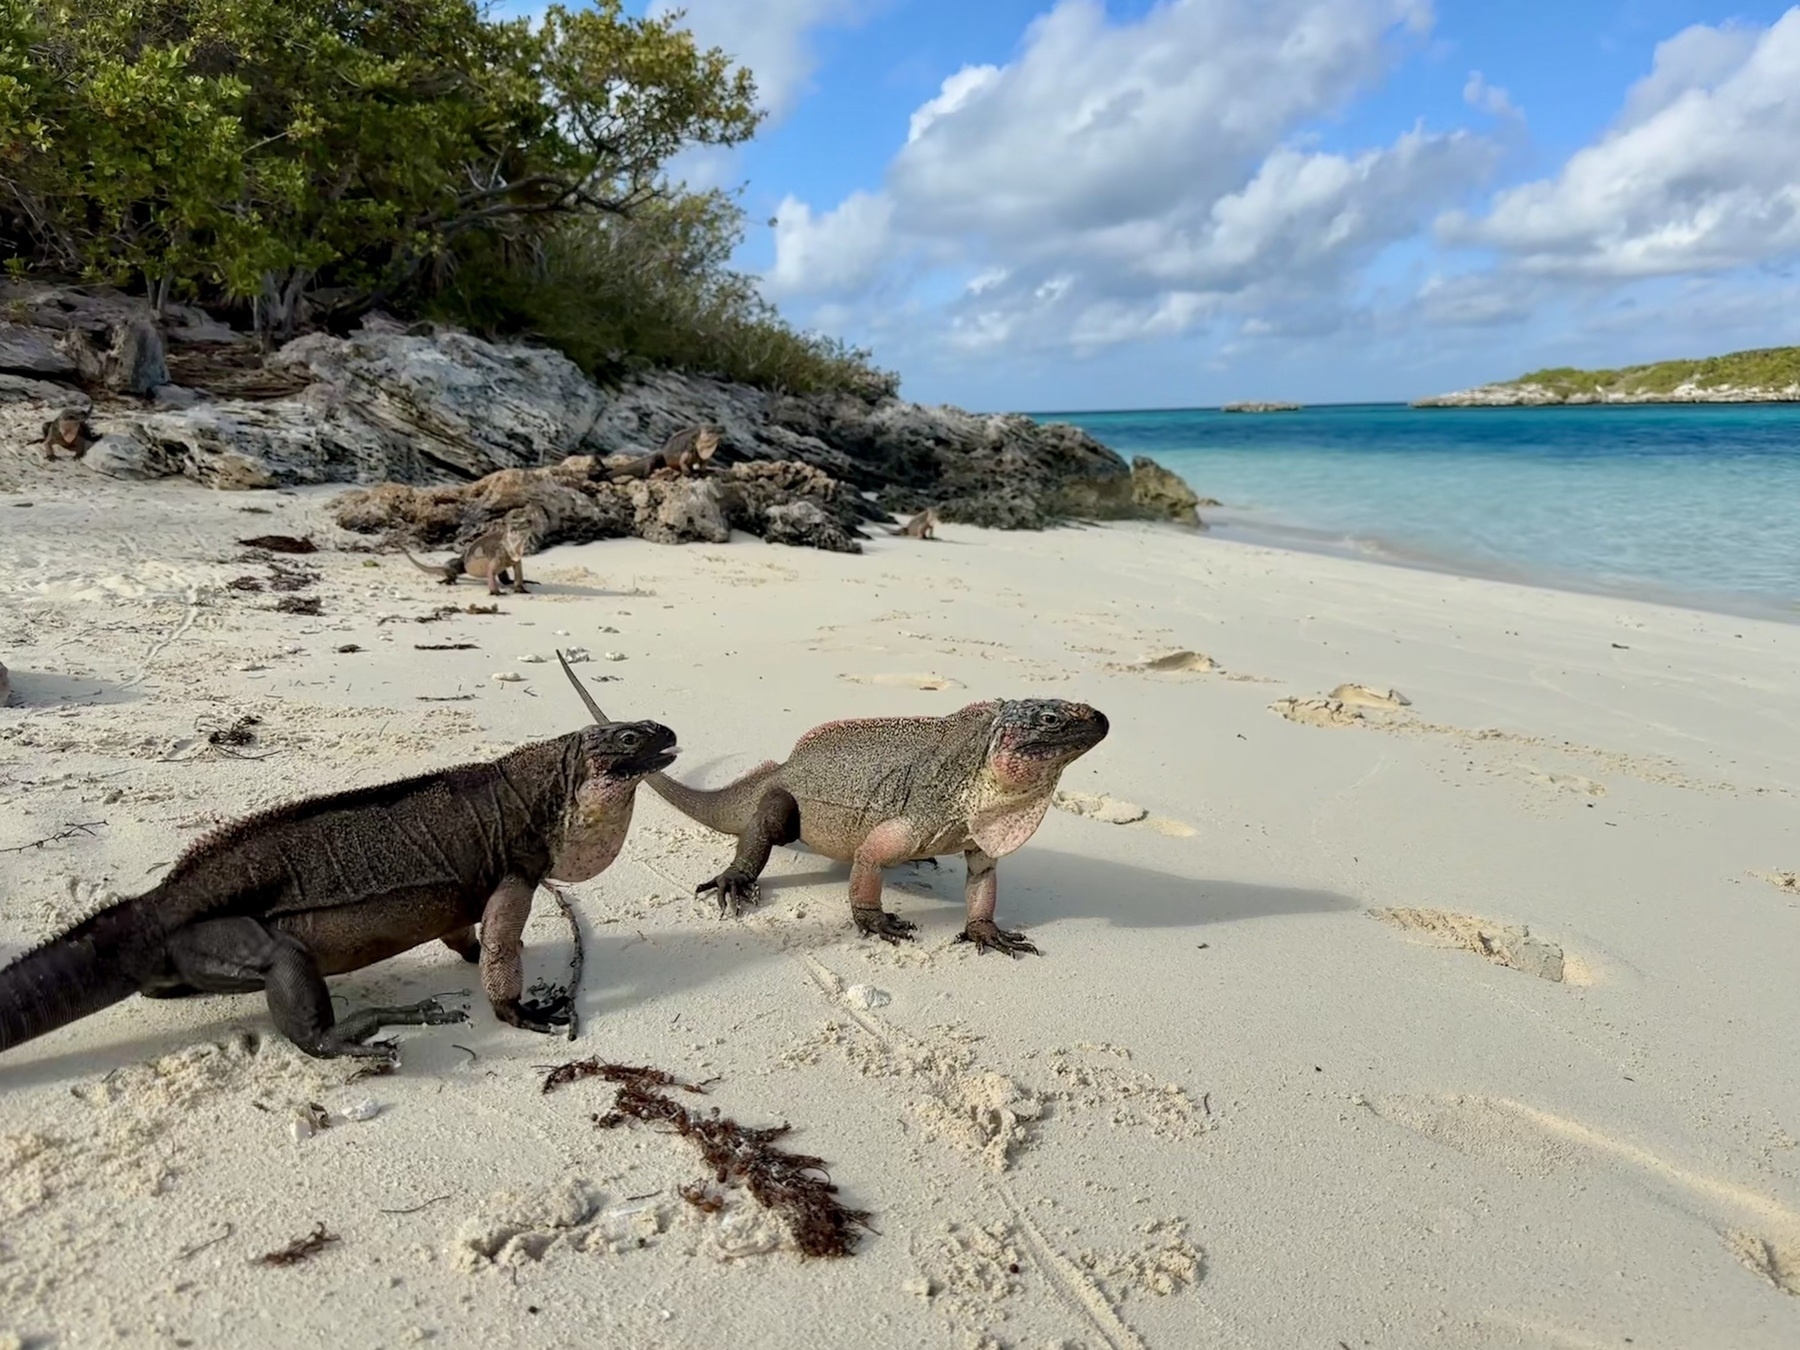 Two iguanas on a tropical beach, facing the water. One is approaching the other from the left. 